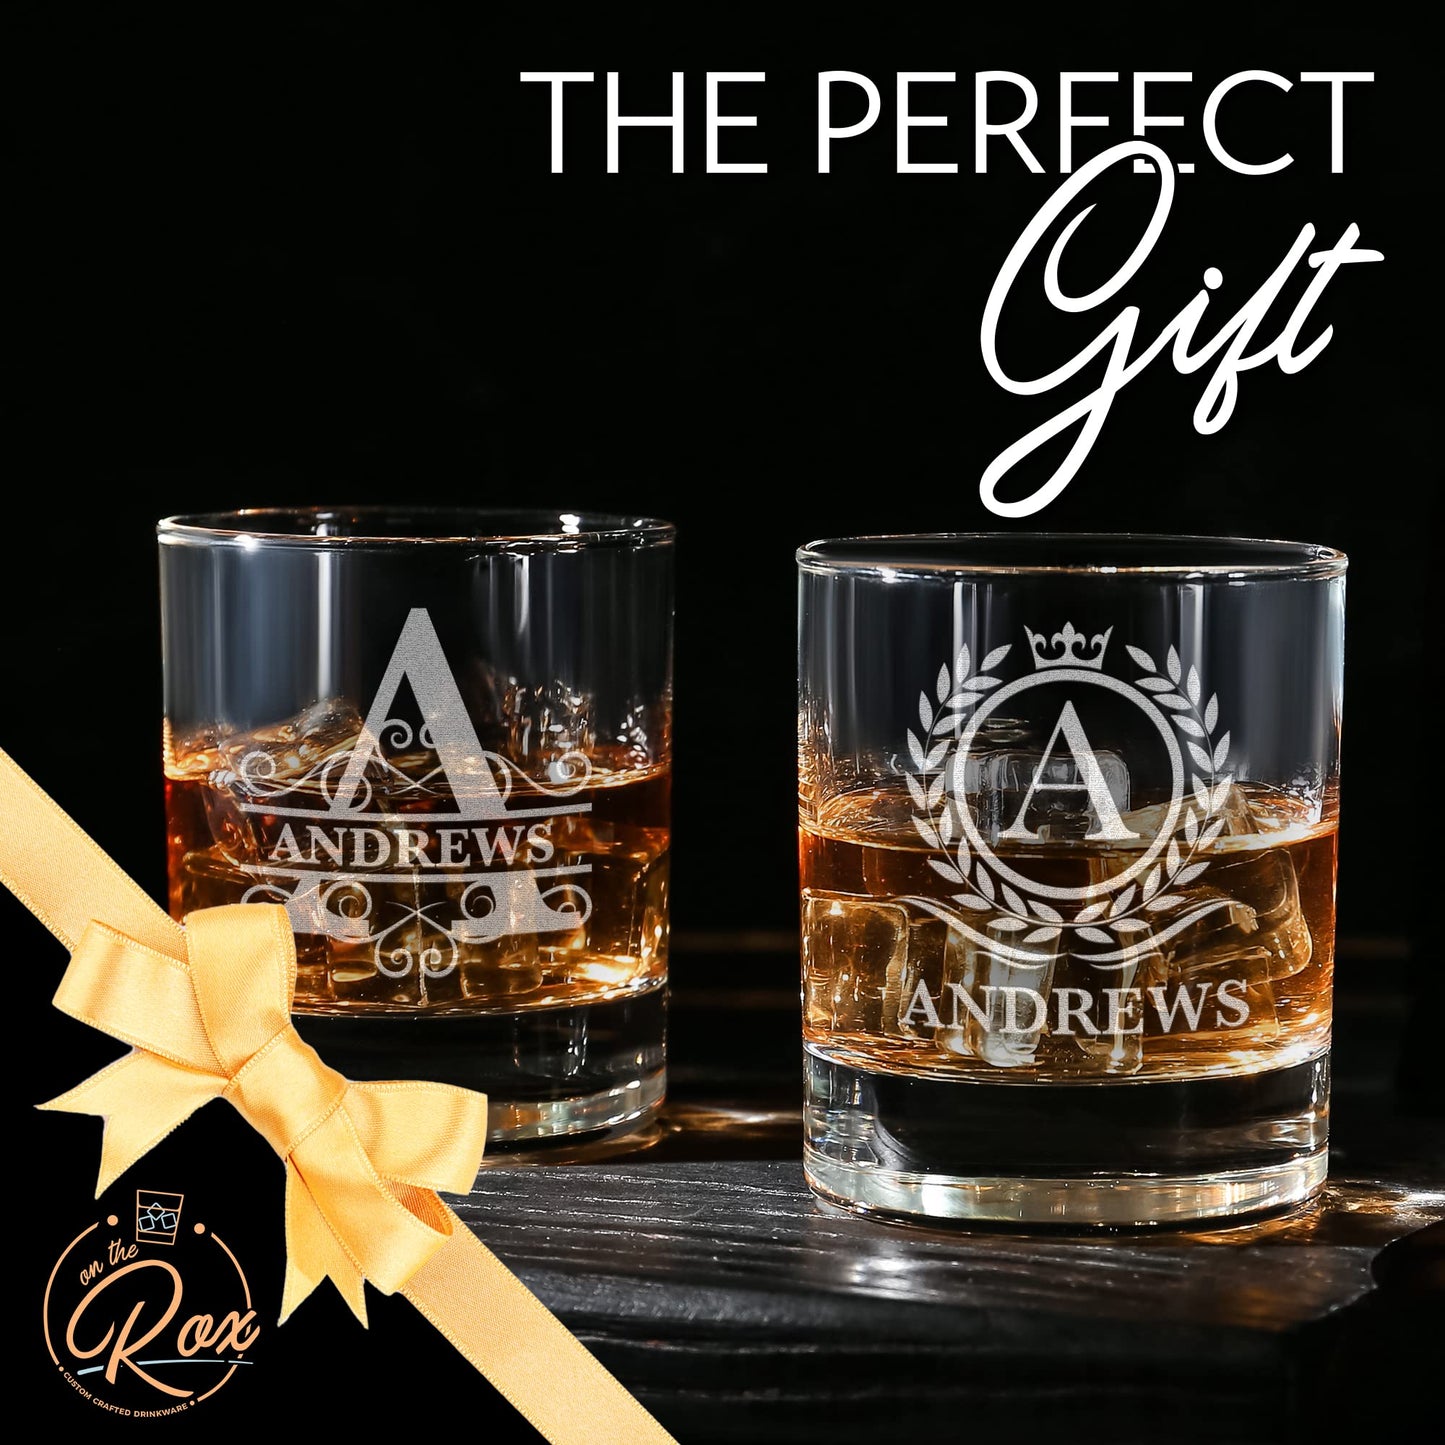 On The Rox Drinks Personalized Whiskey, Bourbon Glass Gifts for Men - 11 oz Engraved Name Monogram Scotch Glass Set of 2 - Customized Cocktail, Rocks, Brandy Glass